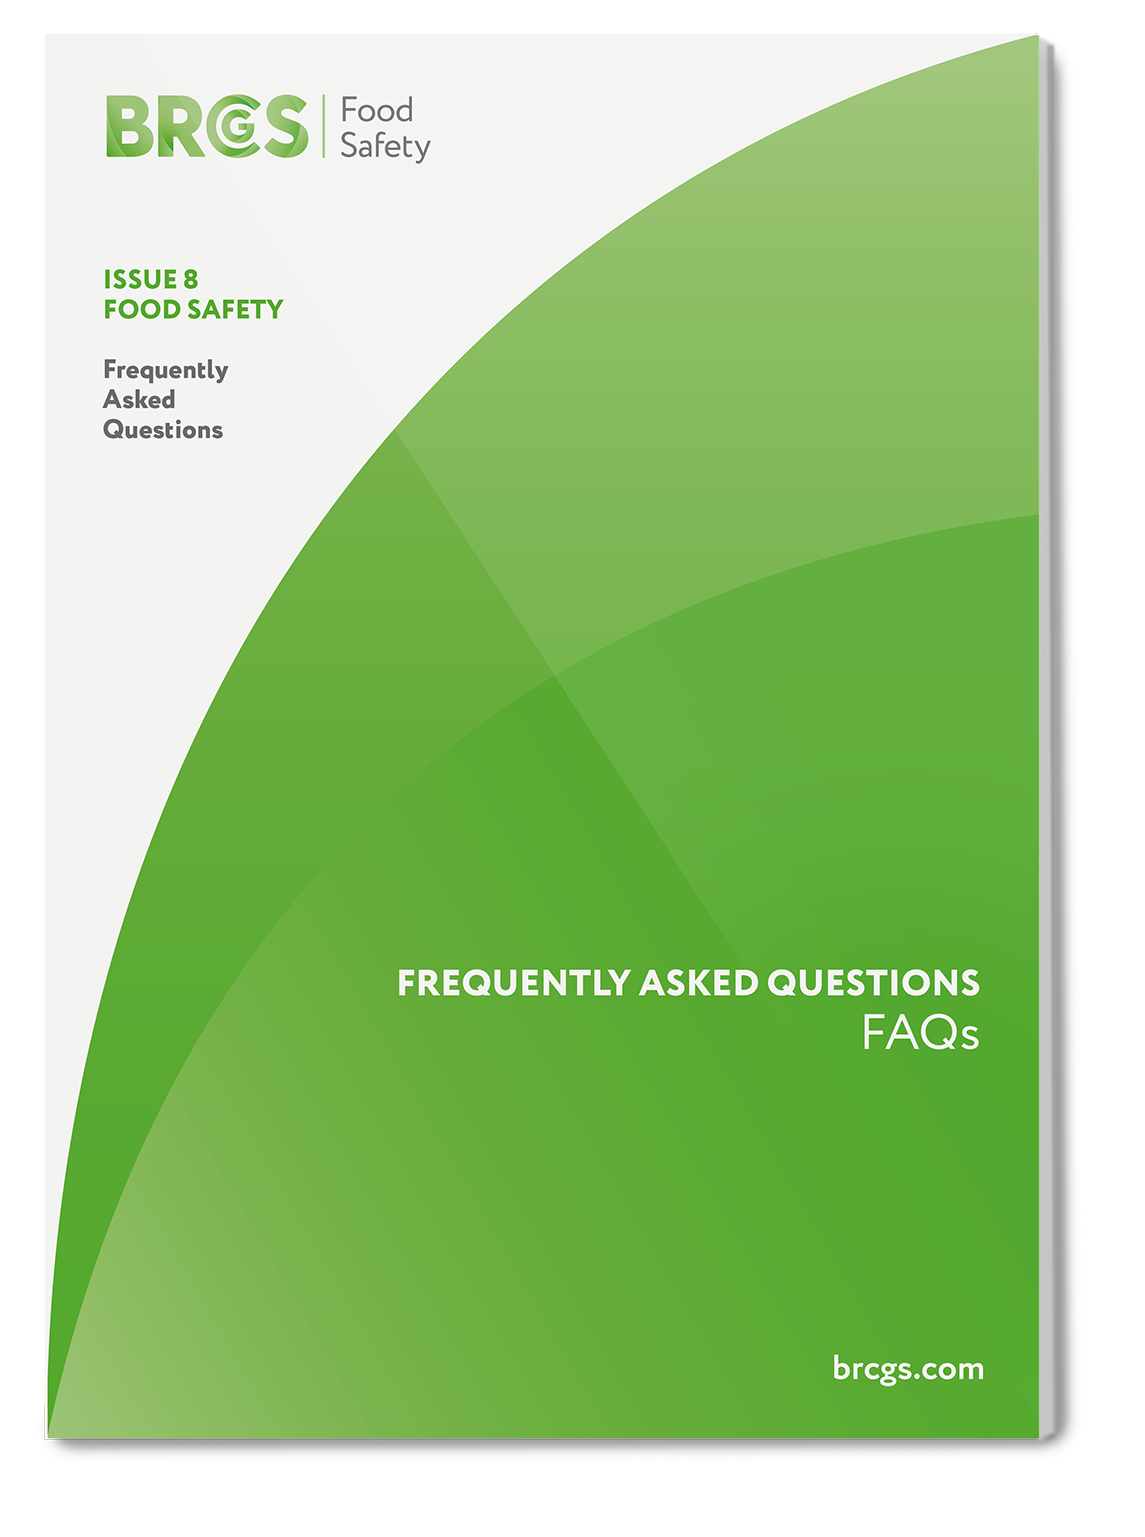 Global Standard for Food Safety Issue 8 FAQs